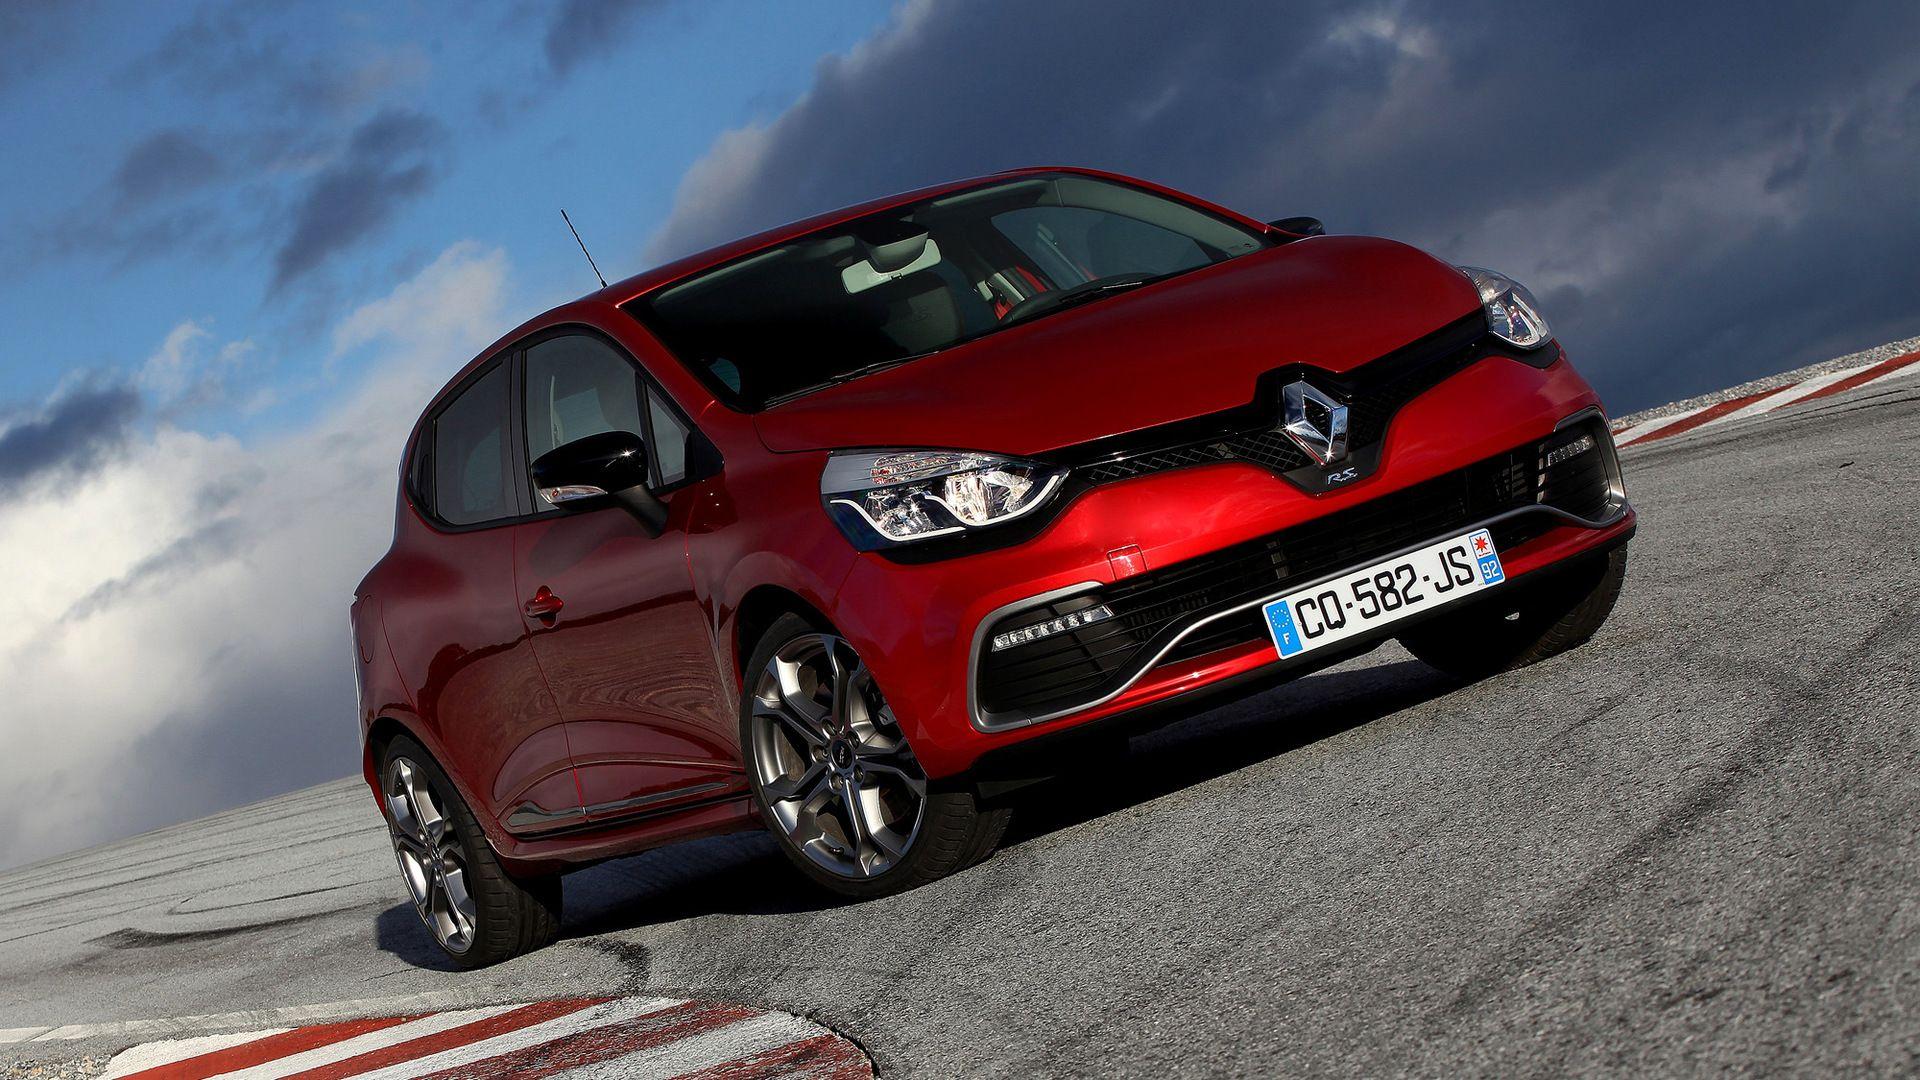 Renault Clio R.S. 200 (2013) Wallpaper and HD Image